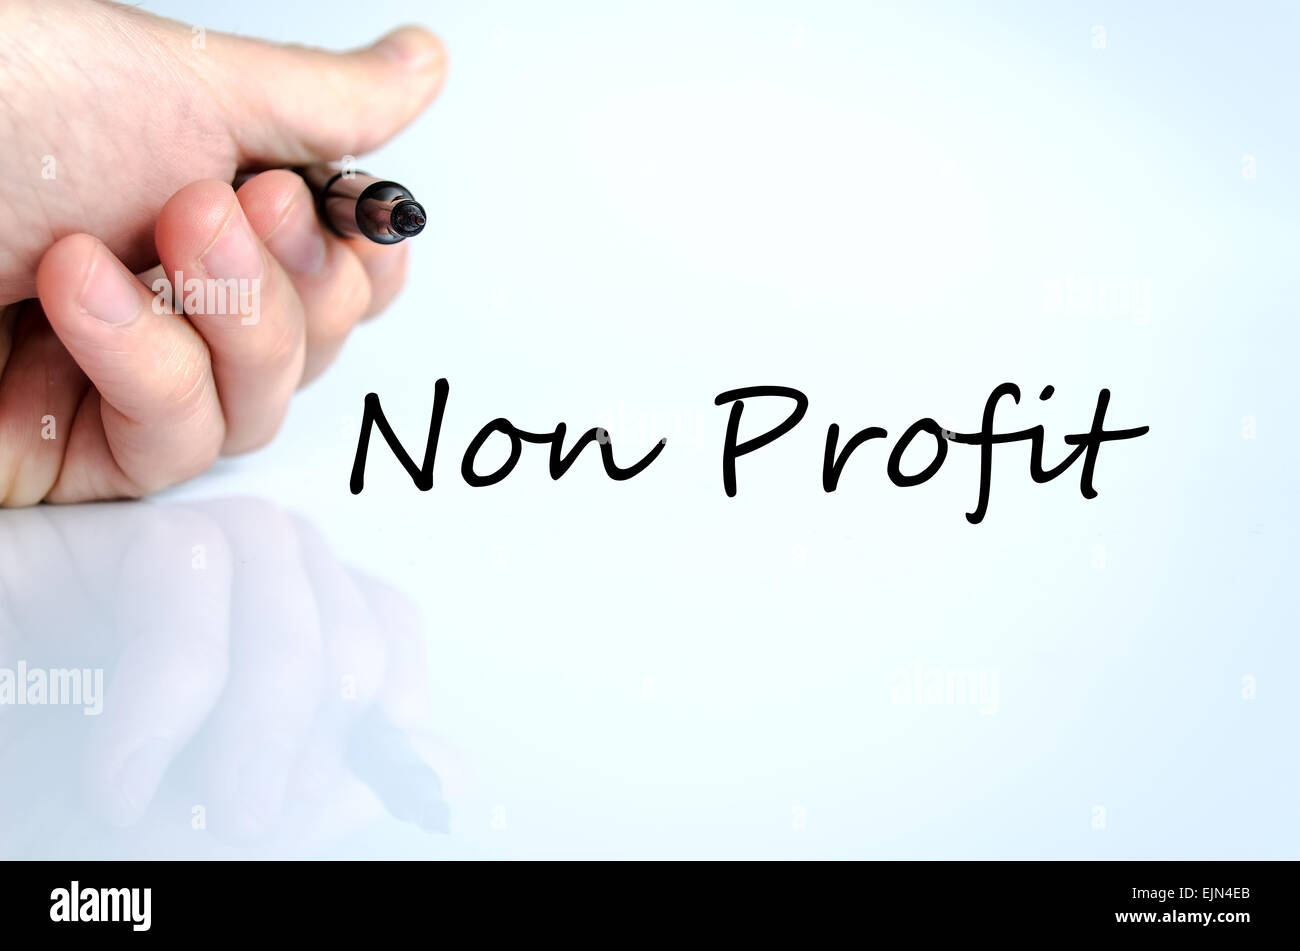 Human hand writing Non Profit  isolated over white background - business concept Stock Photo